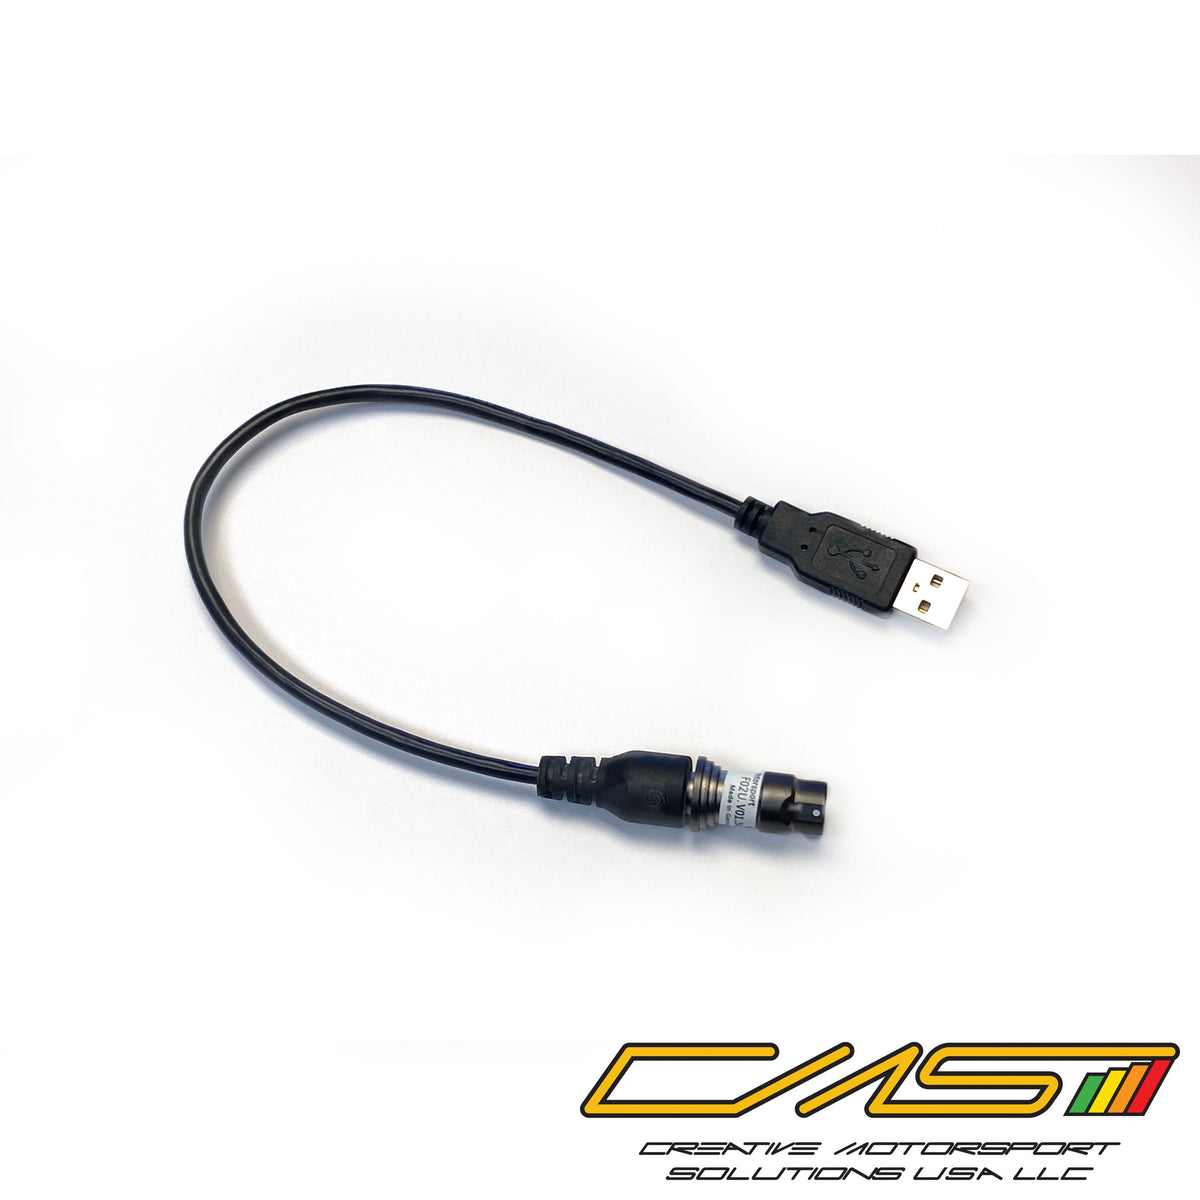 Adapter Cable for Rugged USB Flash Drive to PC USB-Port - Creative Motorsport Solutions